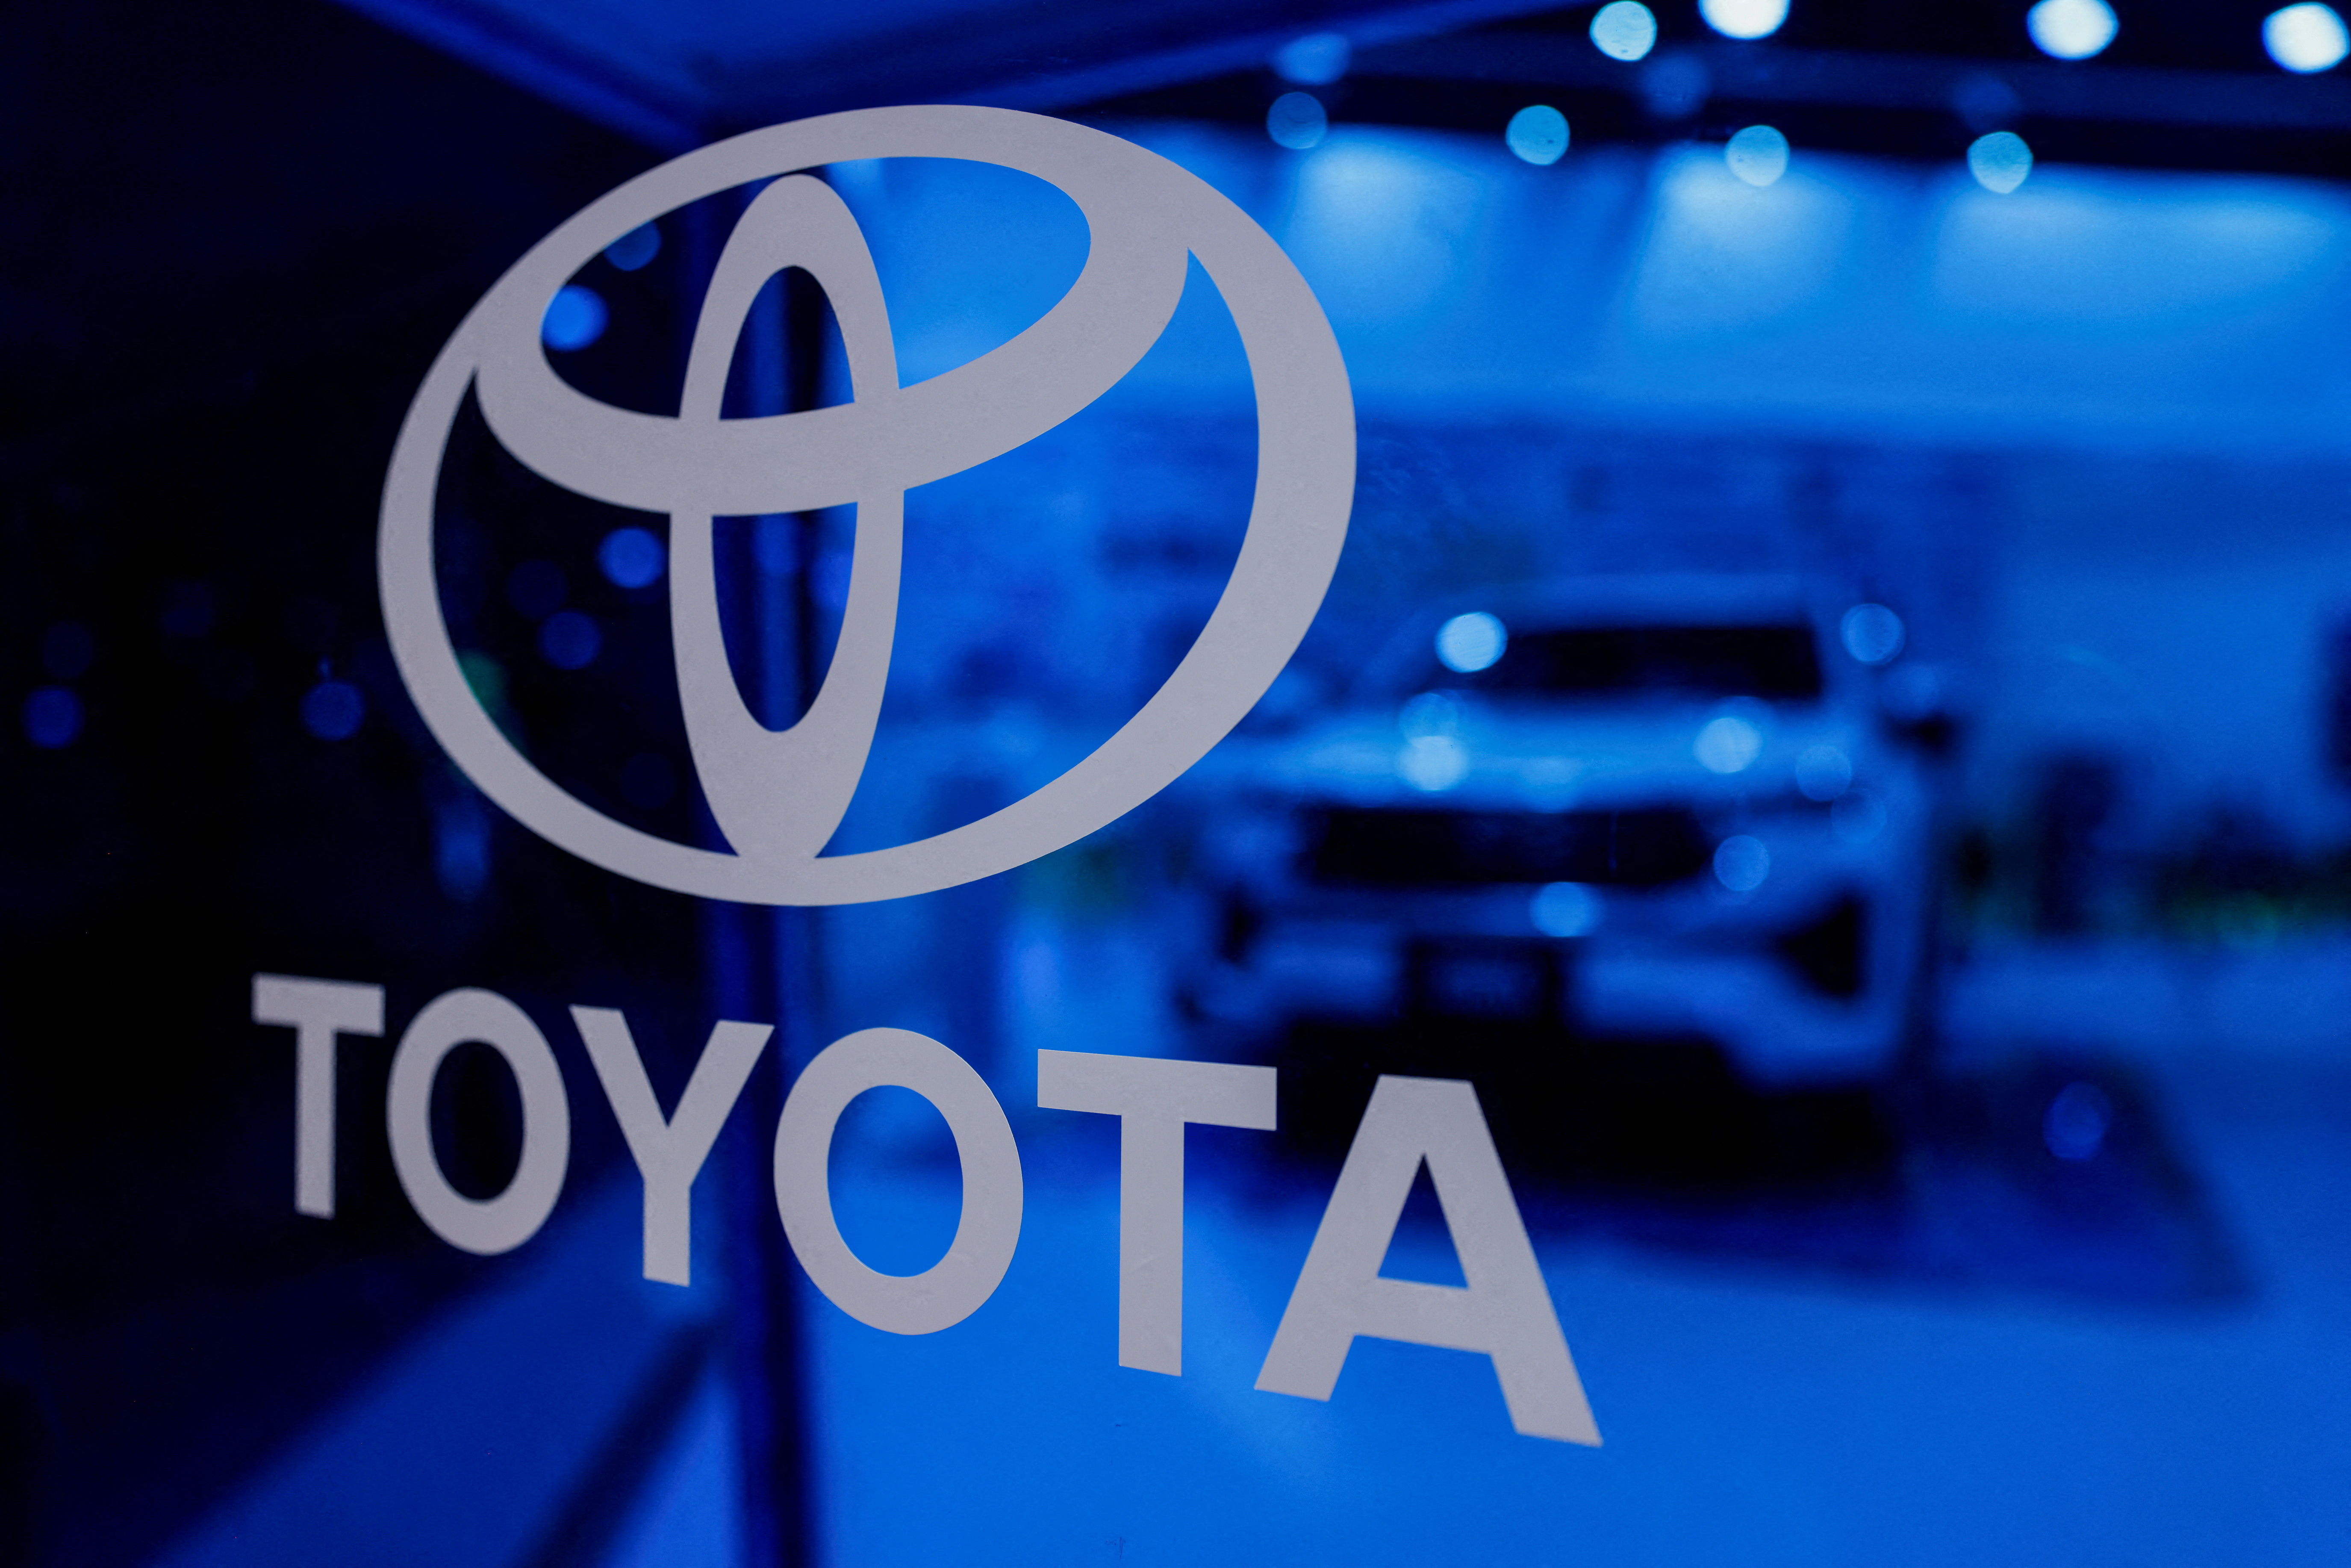 Toyota's logo is seen in their exhibition stall at Bharat Mobility Global Expo organised by India's commerce ministry at Pragati Maidan in New Delhi